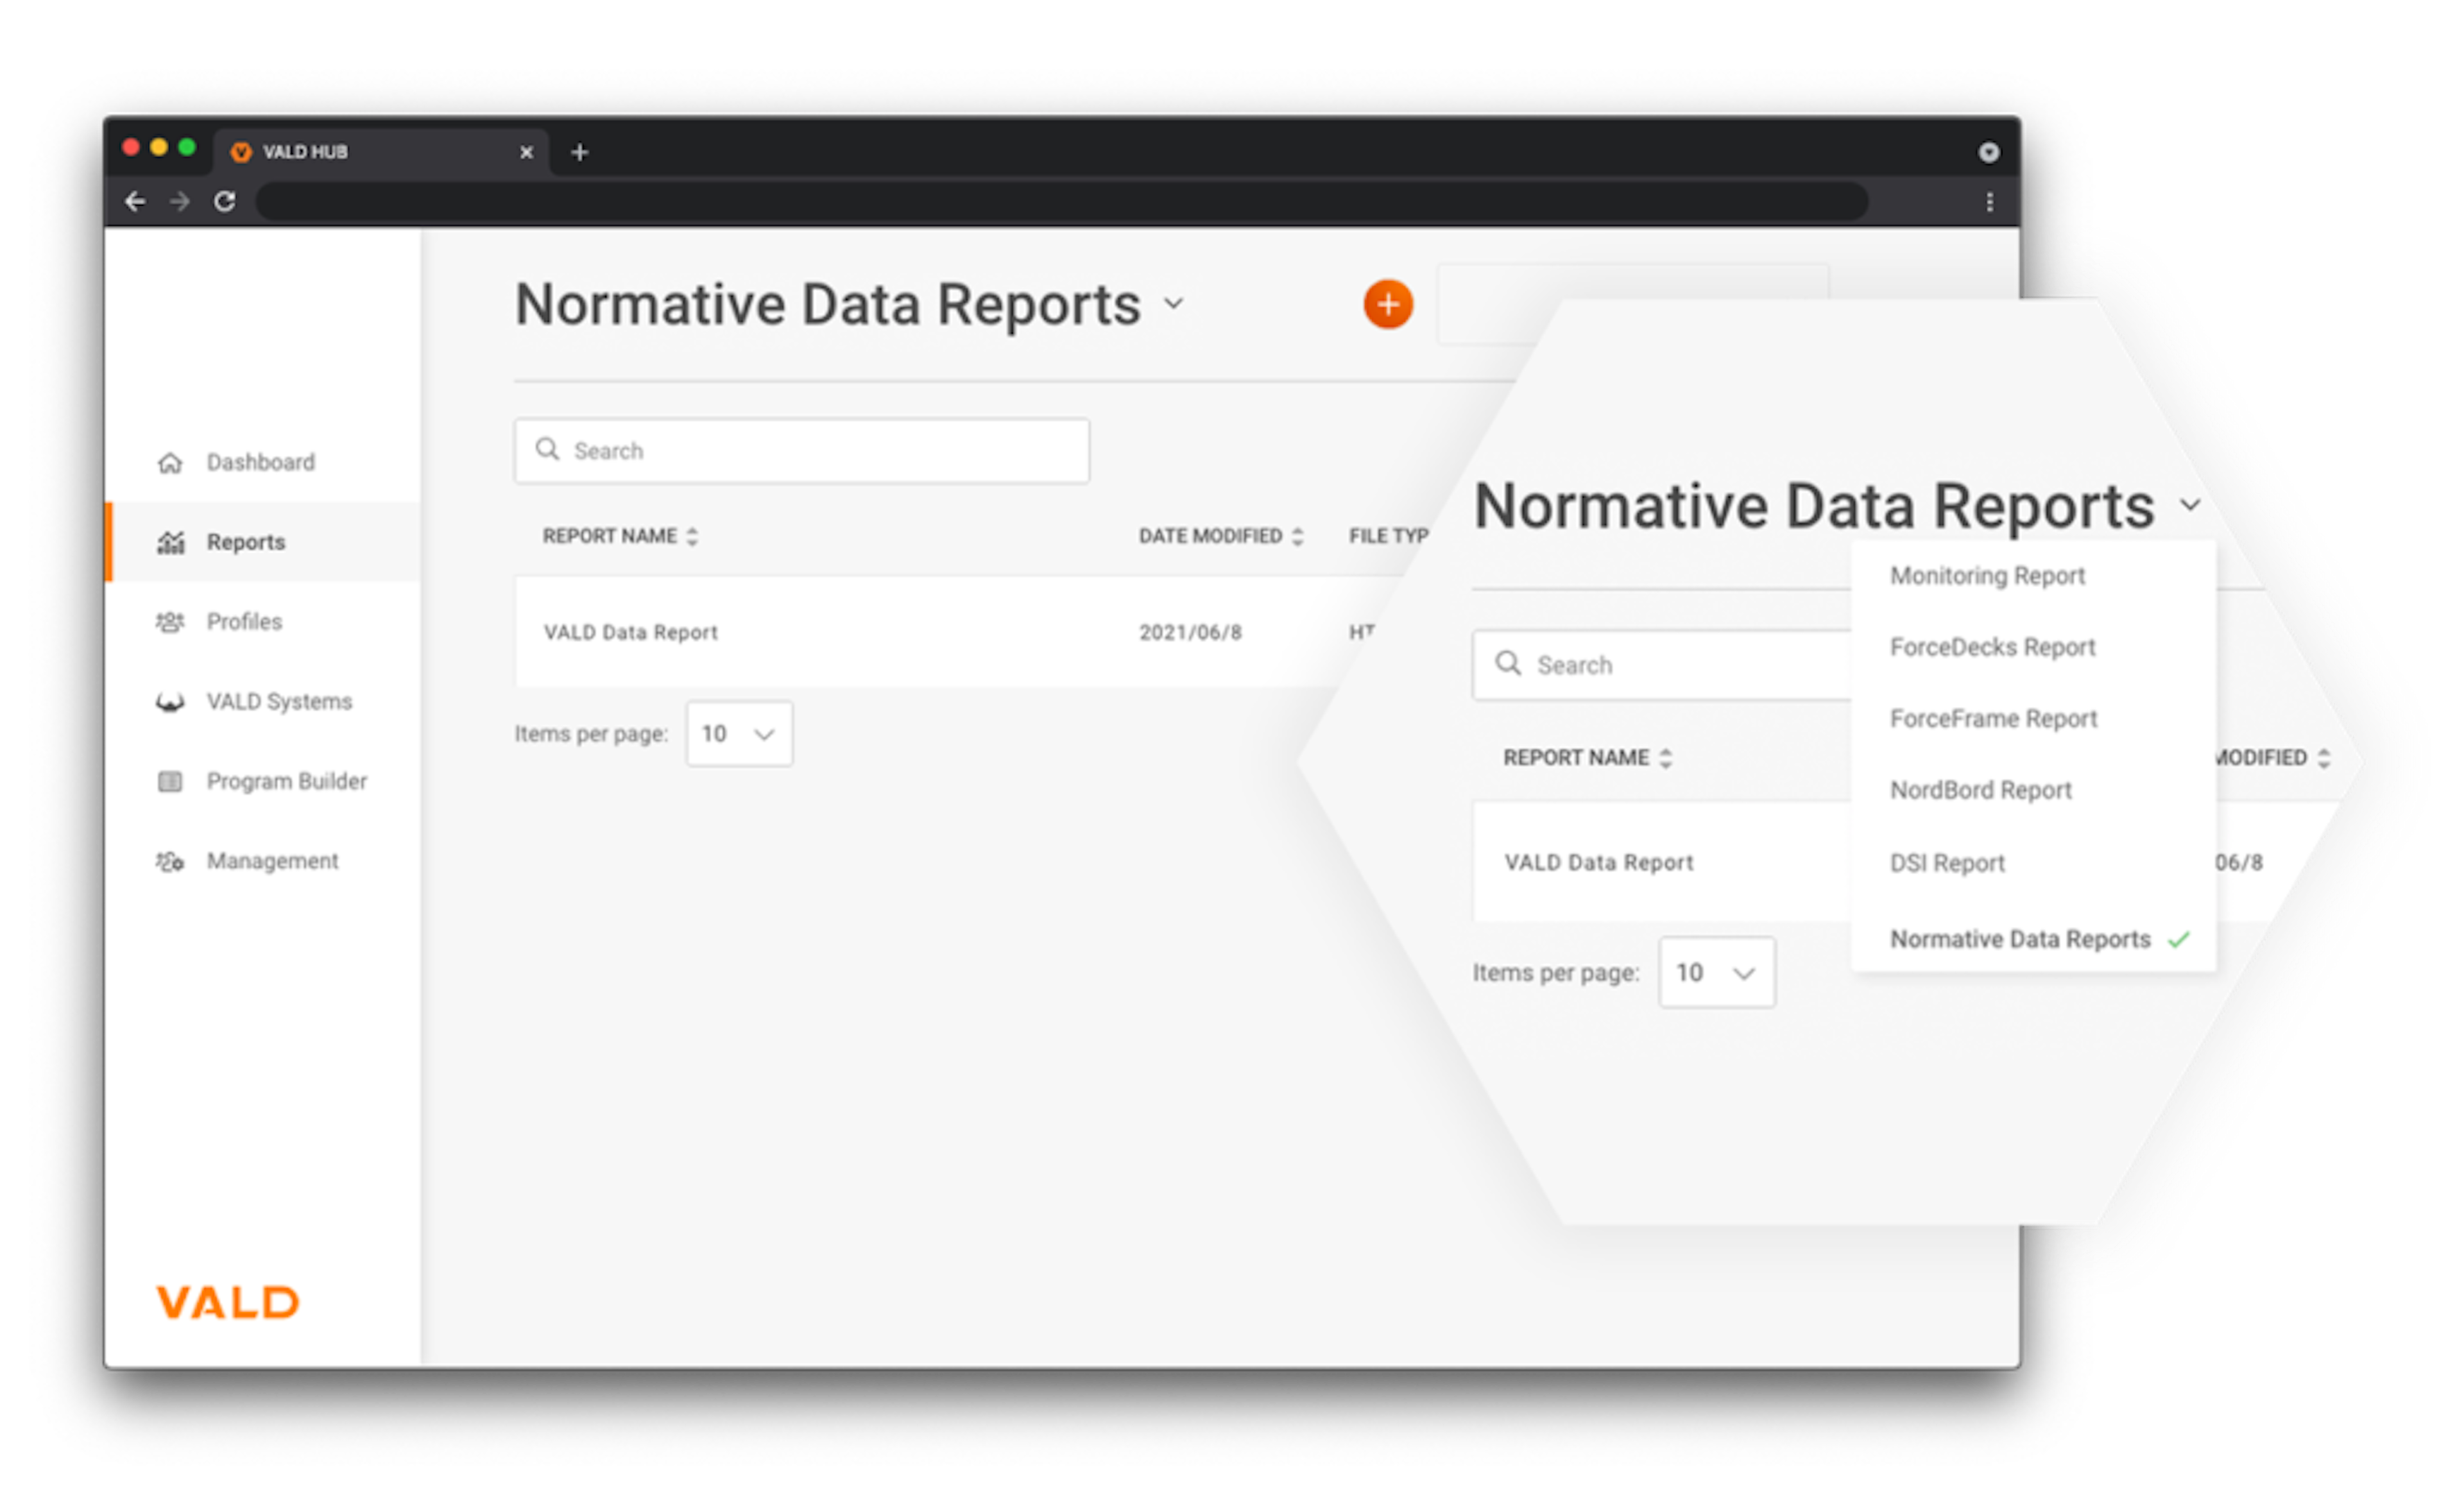 Figure 17. Normative data reports can be found in the Reports tab, by selecting Normative Data Reports from the dropdown menu.